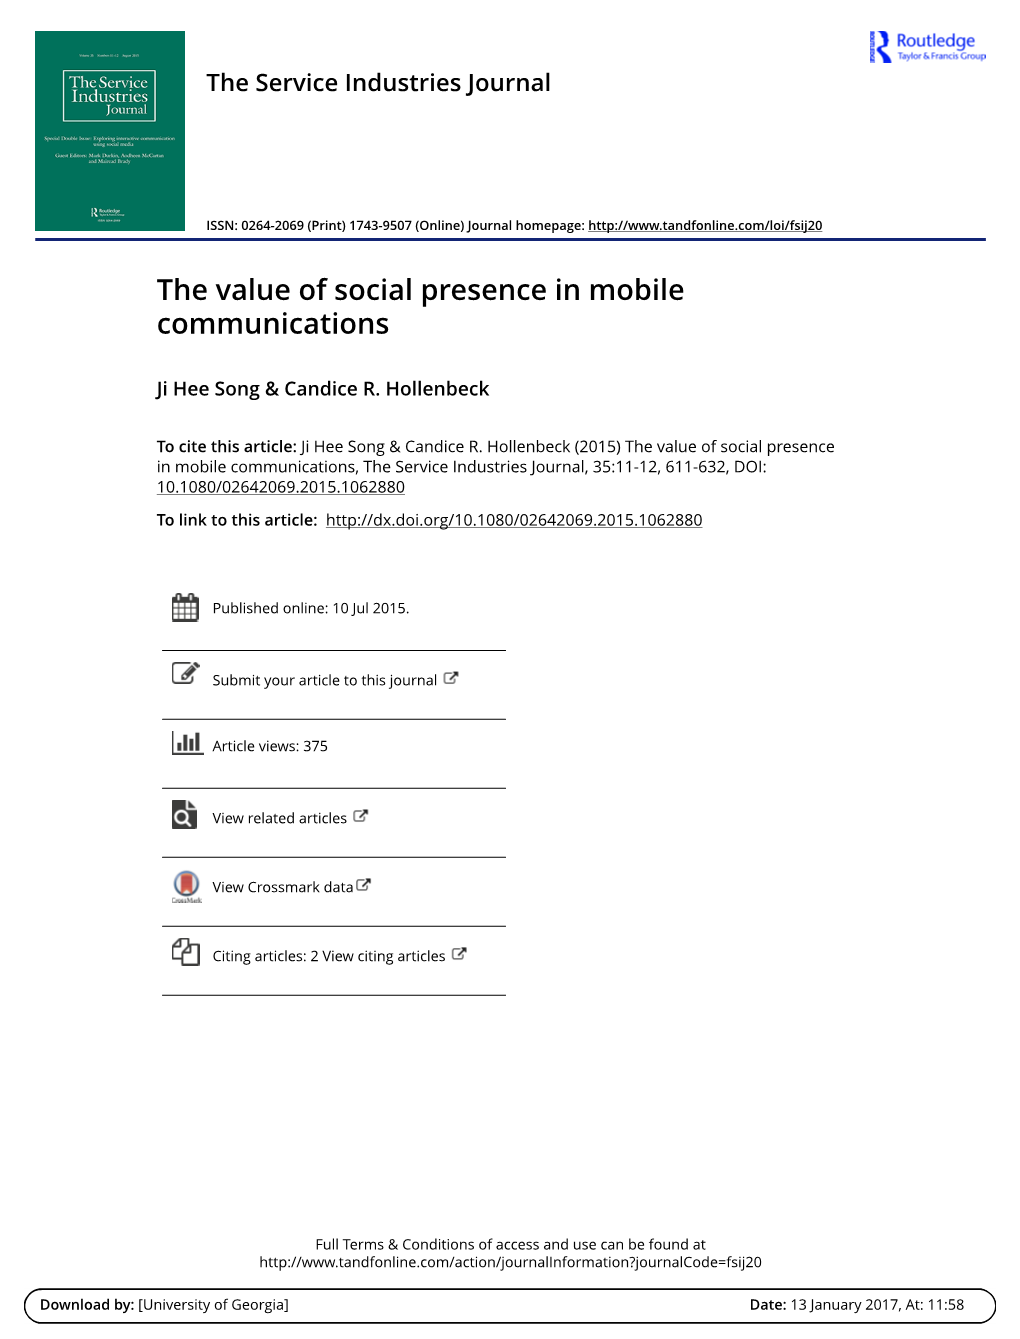 The Value of Social Presence in Mobile Communications